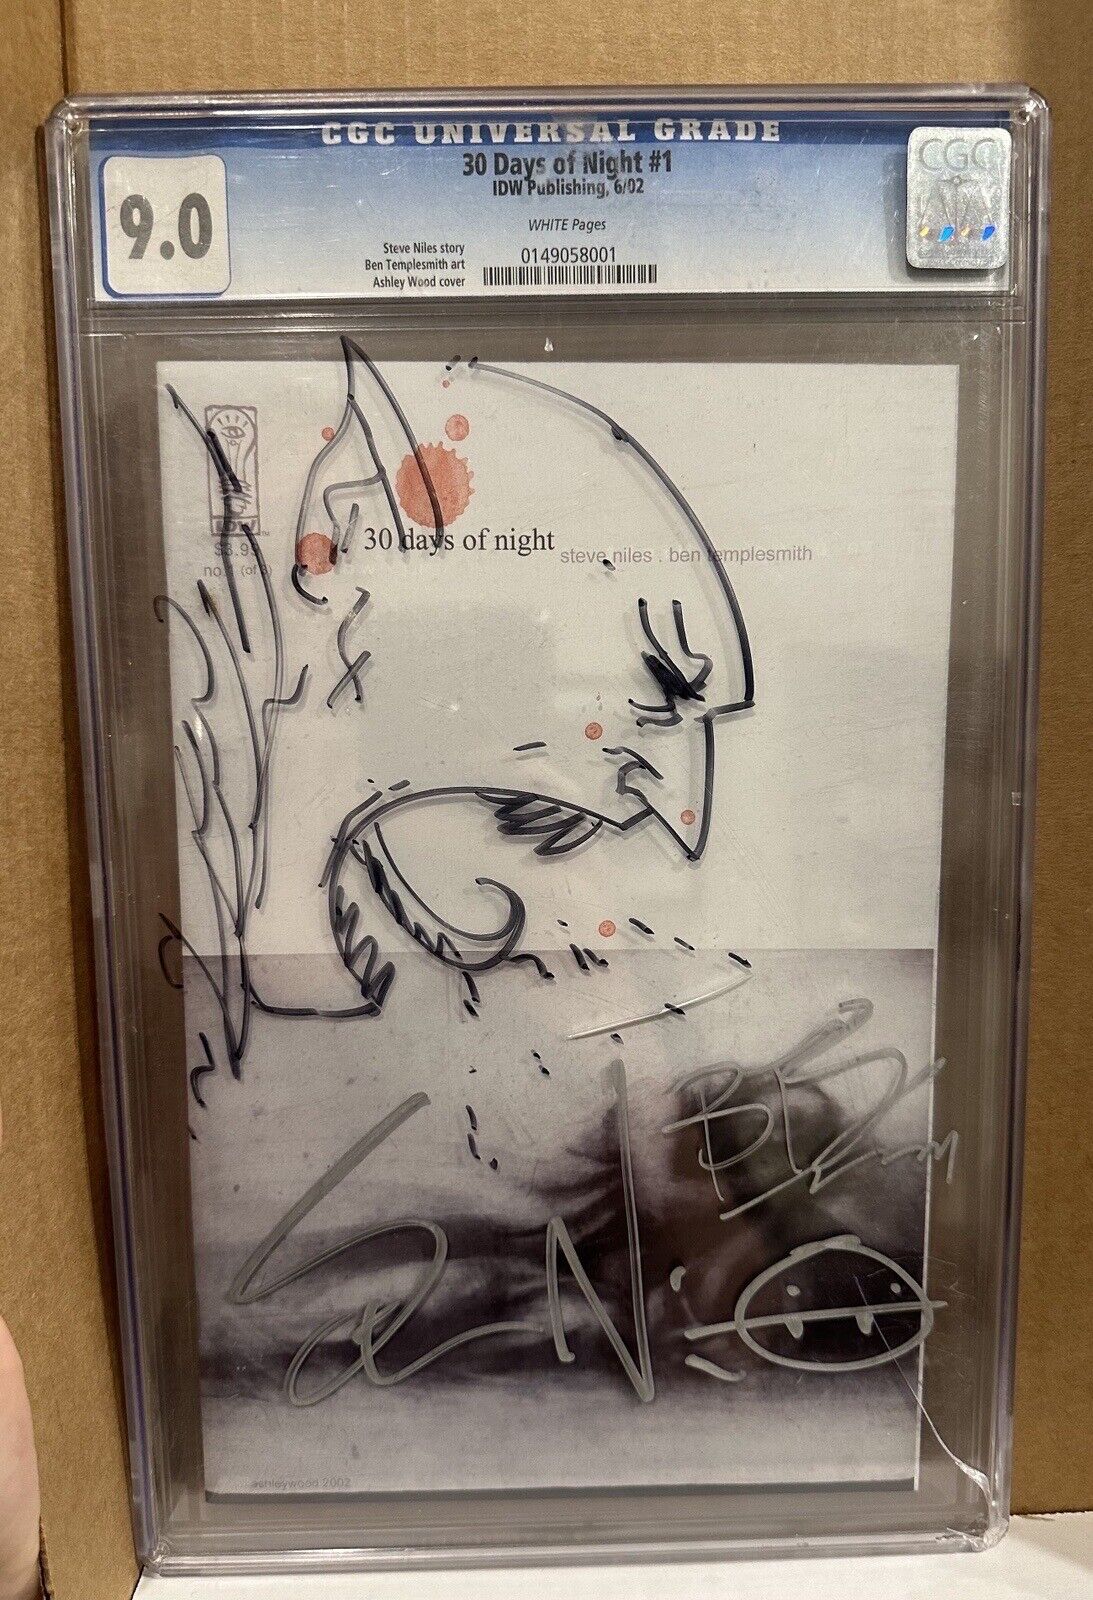 30 days of night #1 CGC 9.0 signed Steve Niles &Ben Templesmith sketch 1st print